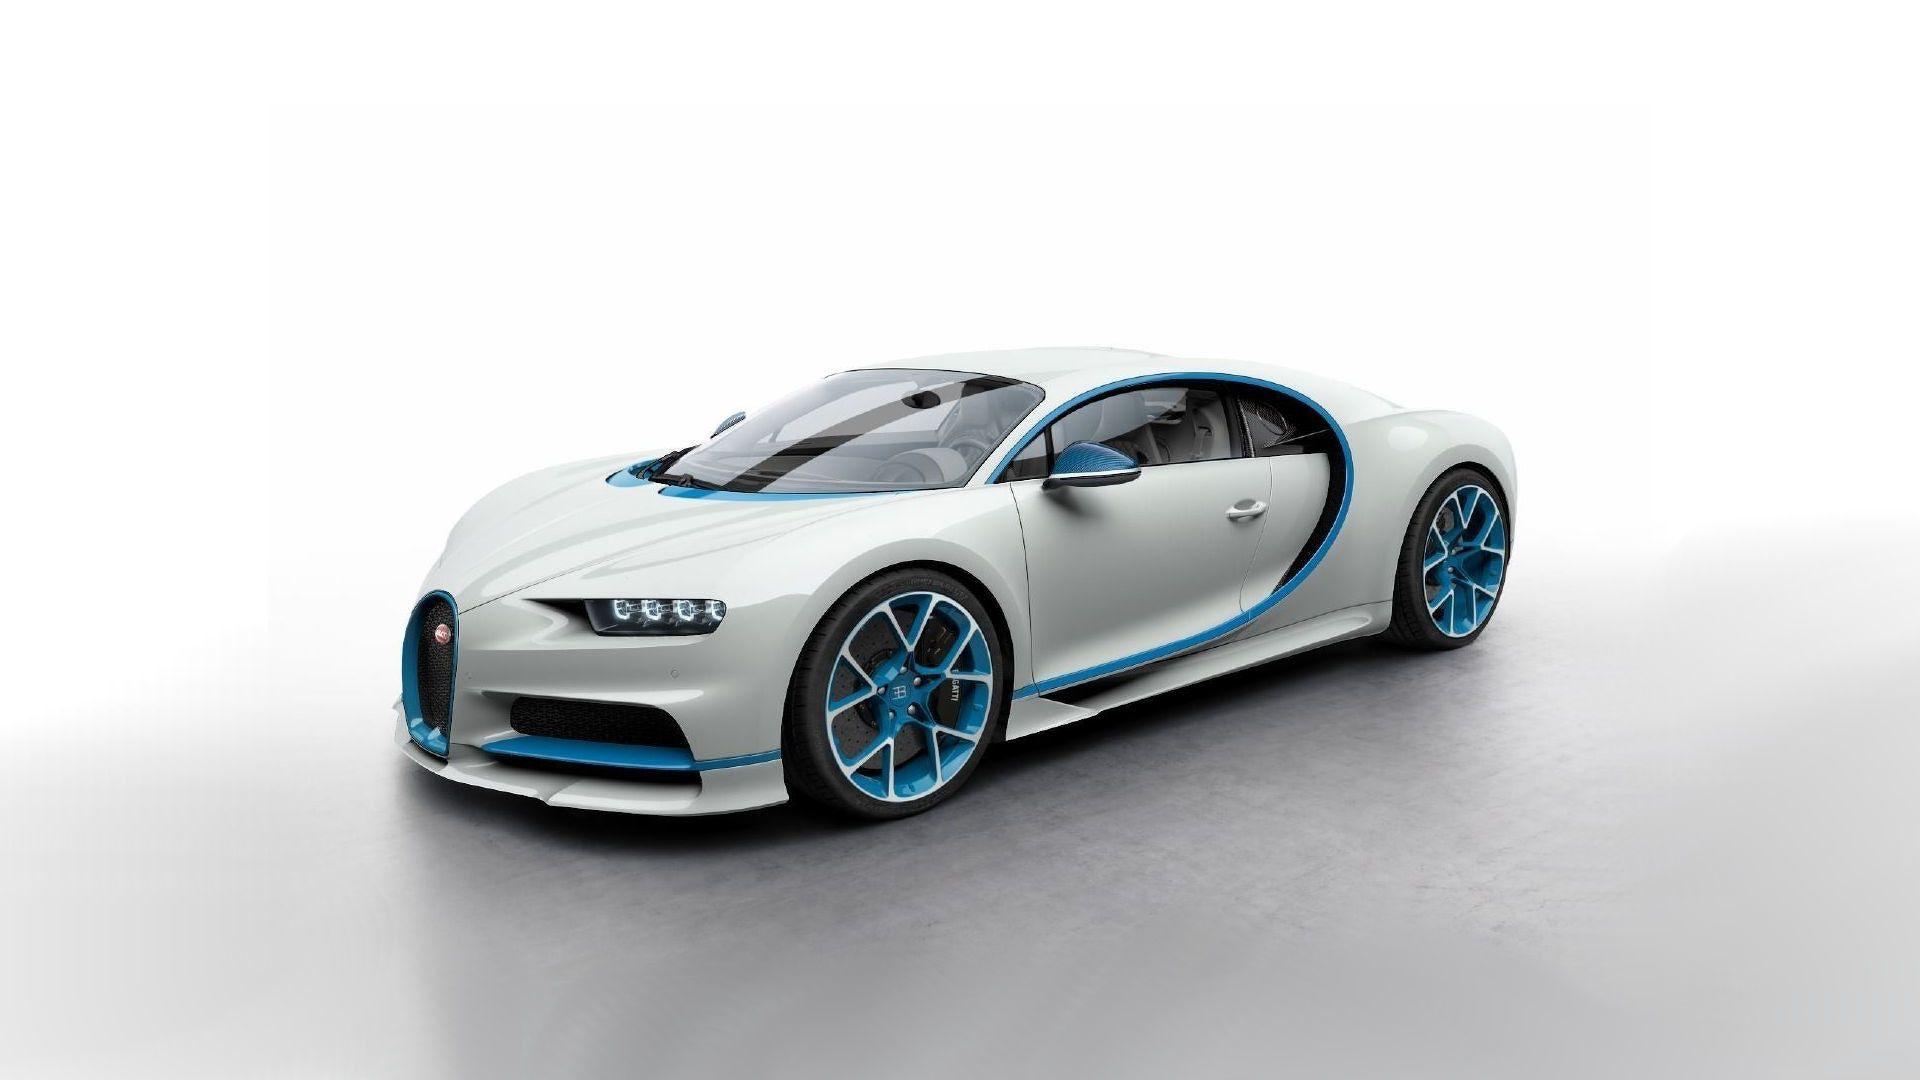 This Bugatti Chiron costs even more than you imagine 1 Image